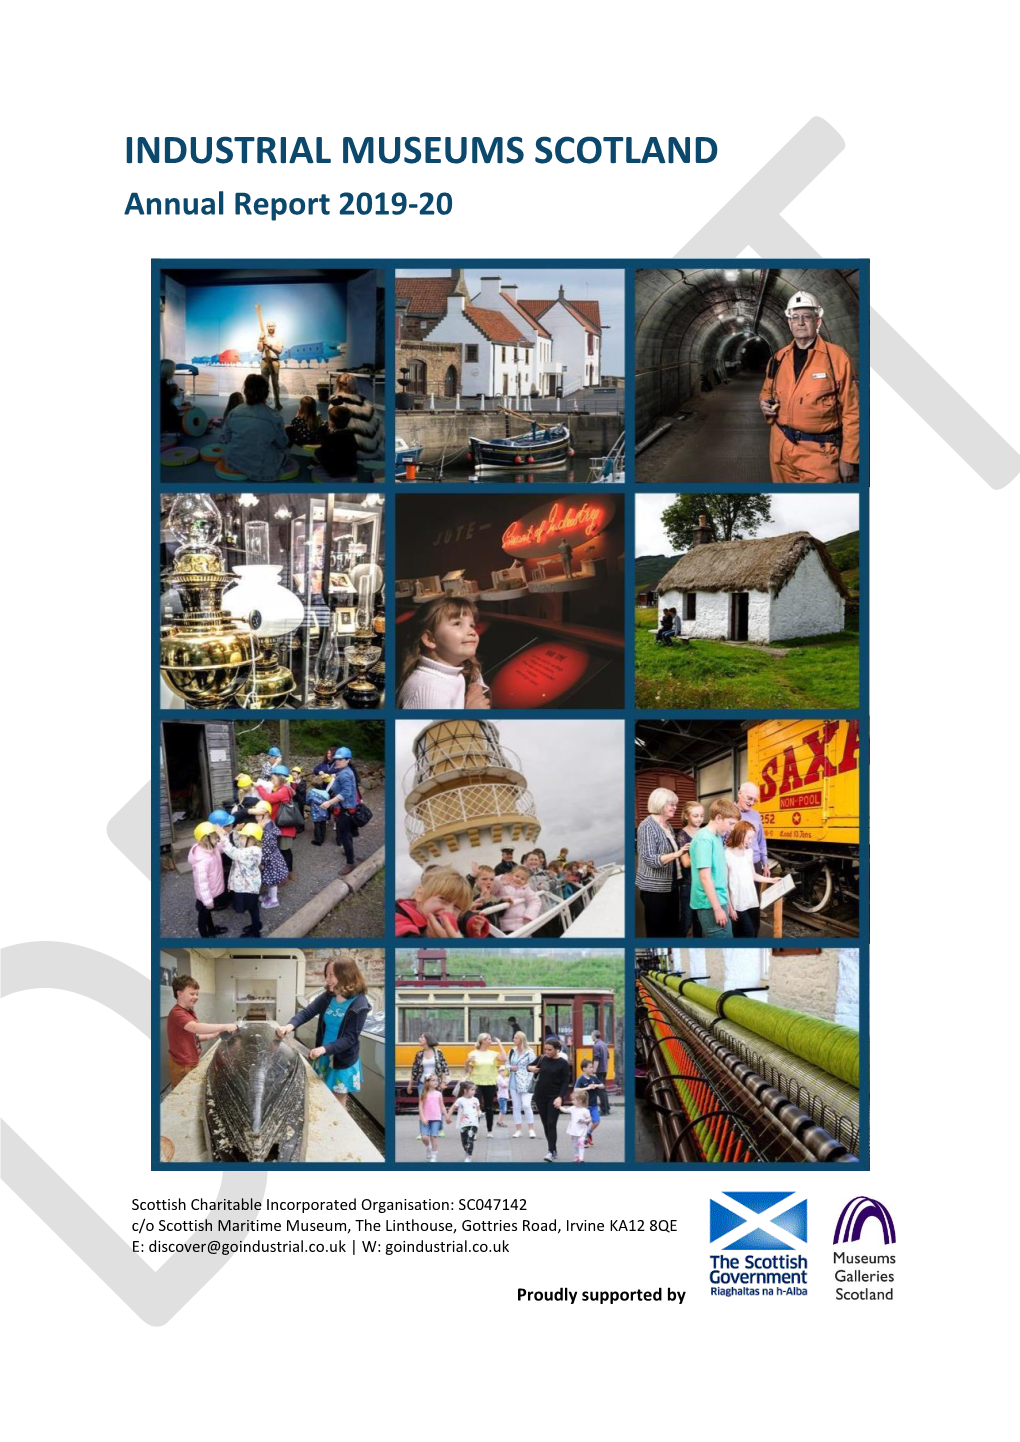 INDUSTRIAL MUSEUMS SCOTLAND Annual Report 2019-20